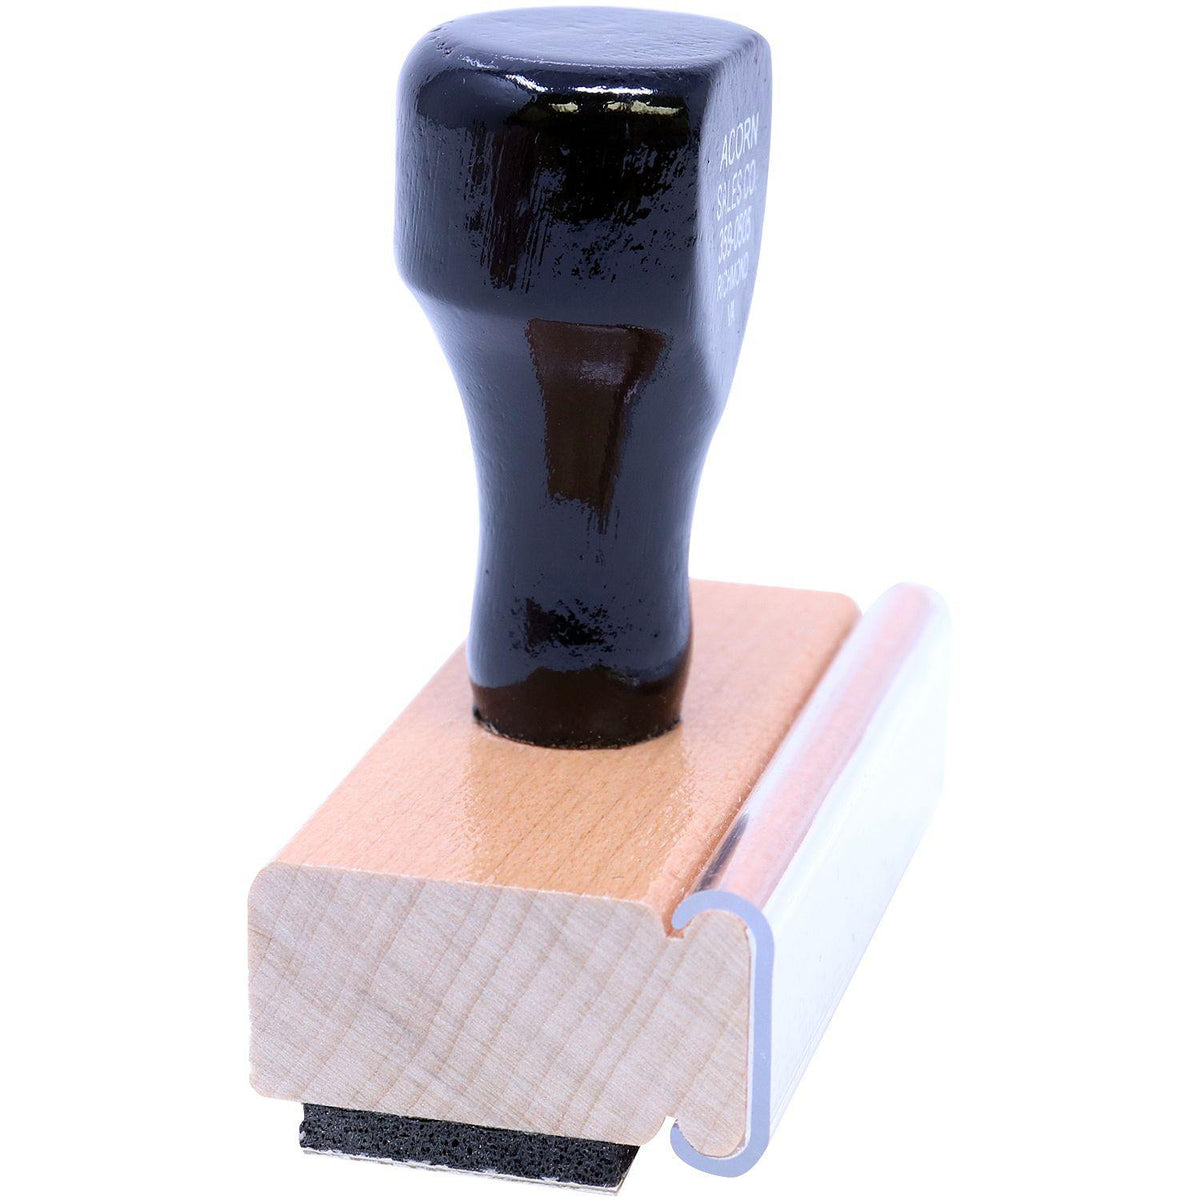 Side View of Large Outline Paid with Box Rubber Stamp at an Angle